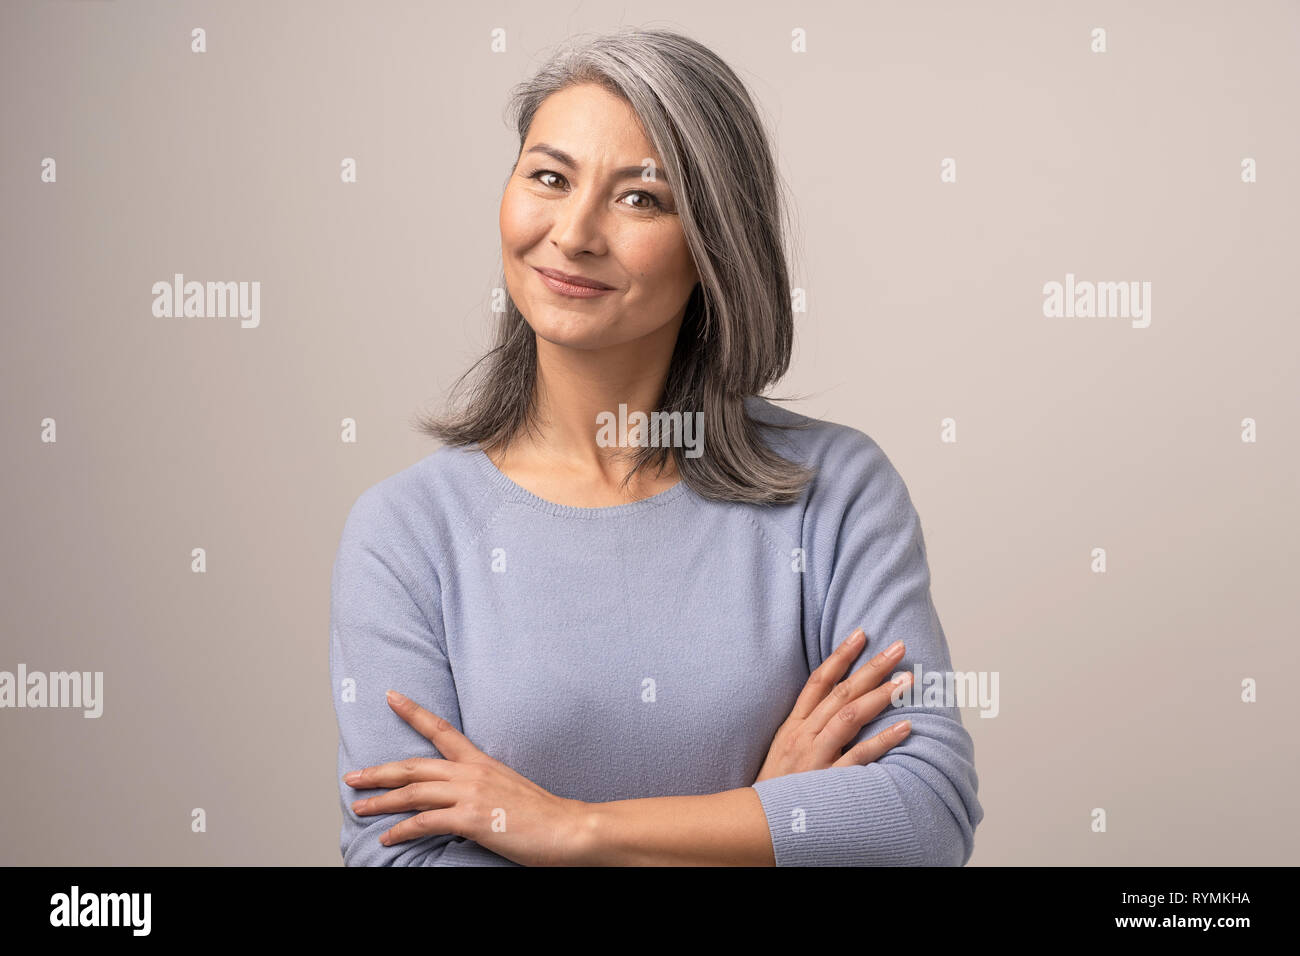 Smiling Asian woman with crossed arms Banque D'Images